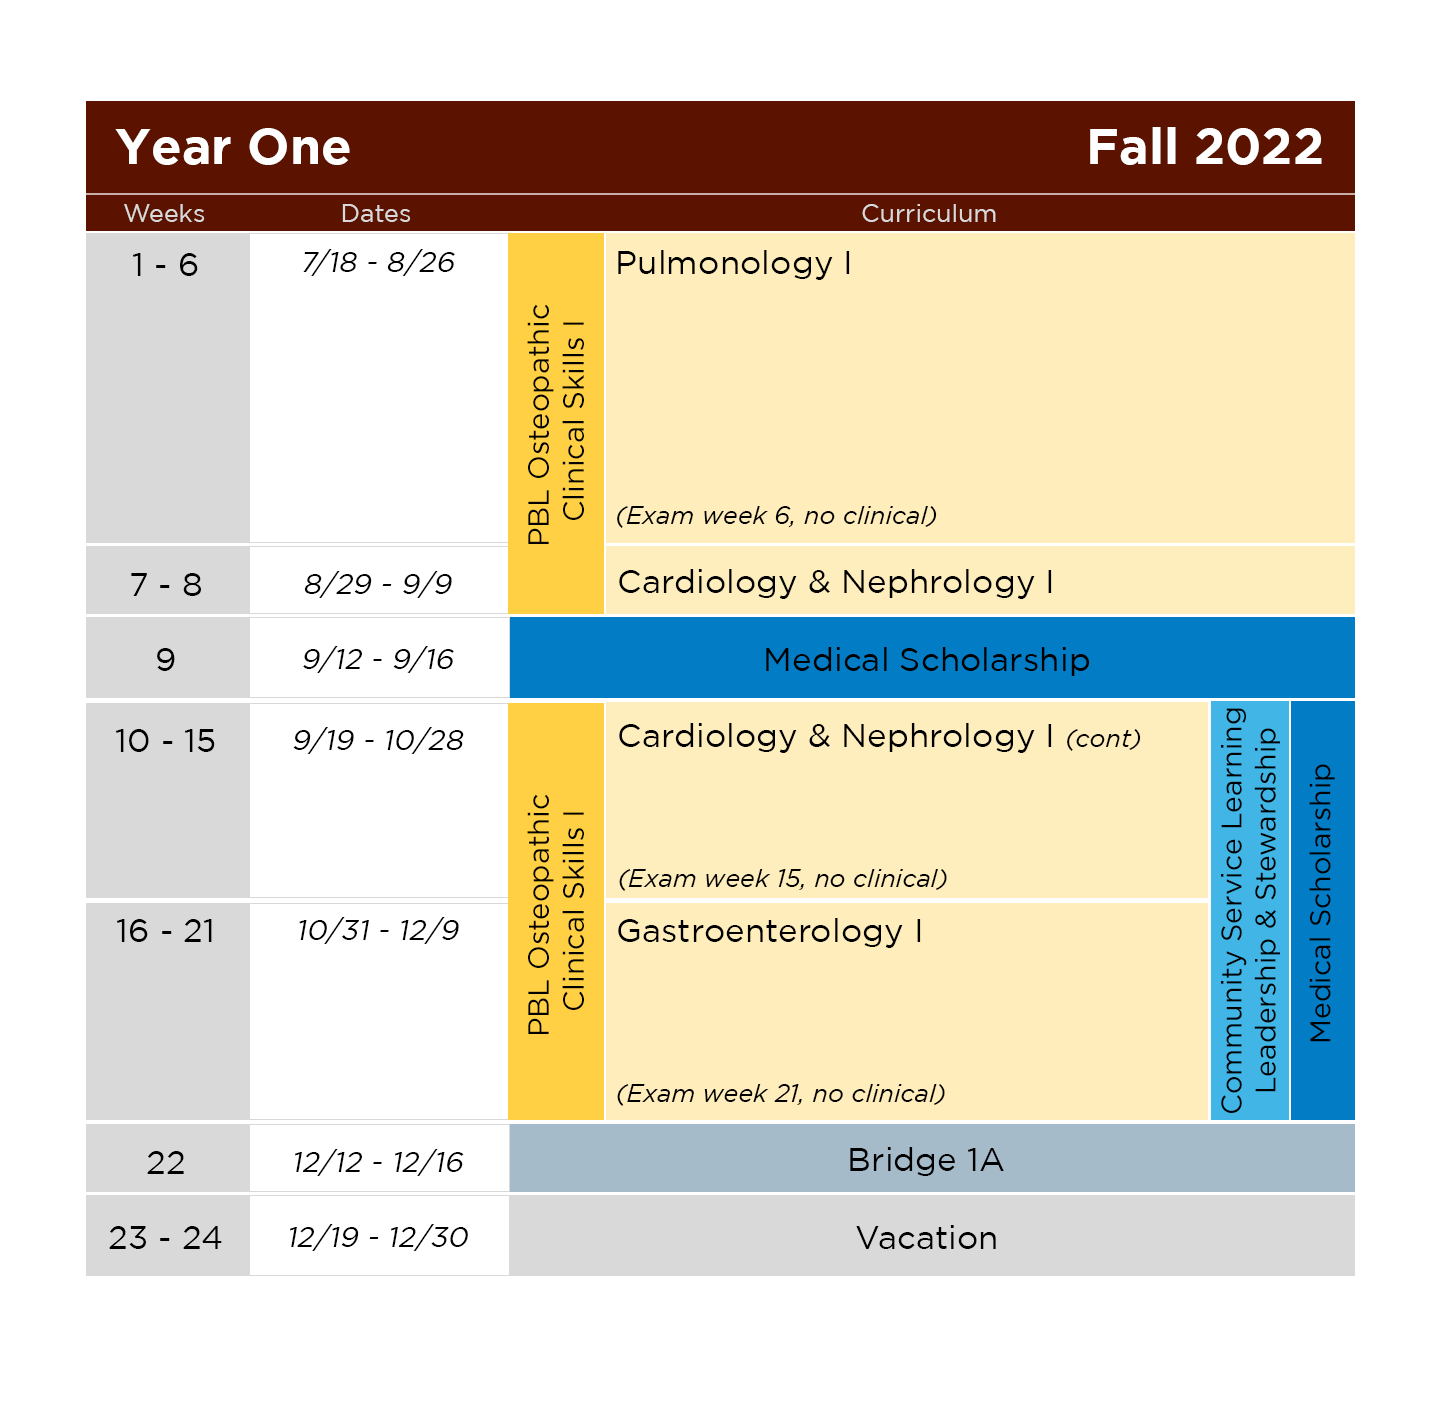 A sample of the schedule for PBL Year One Fall 2022